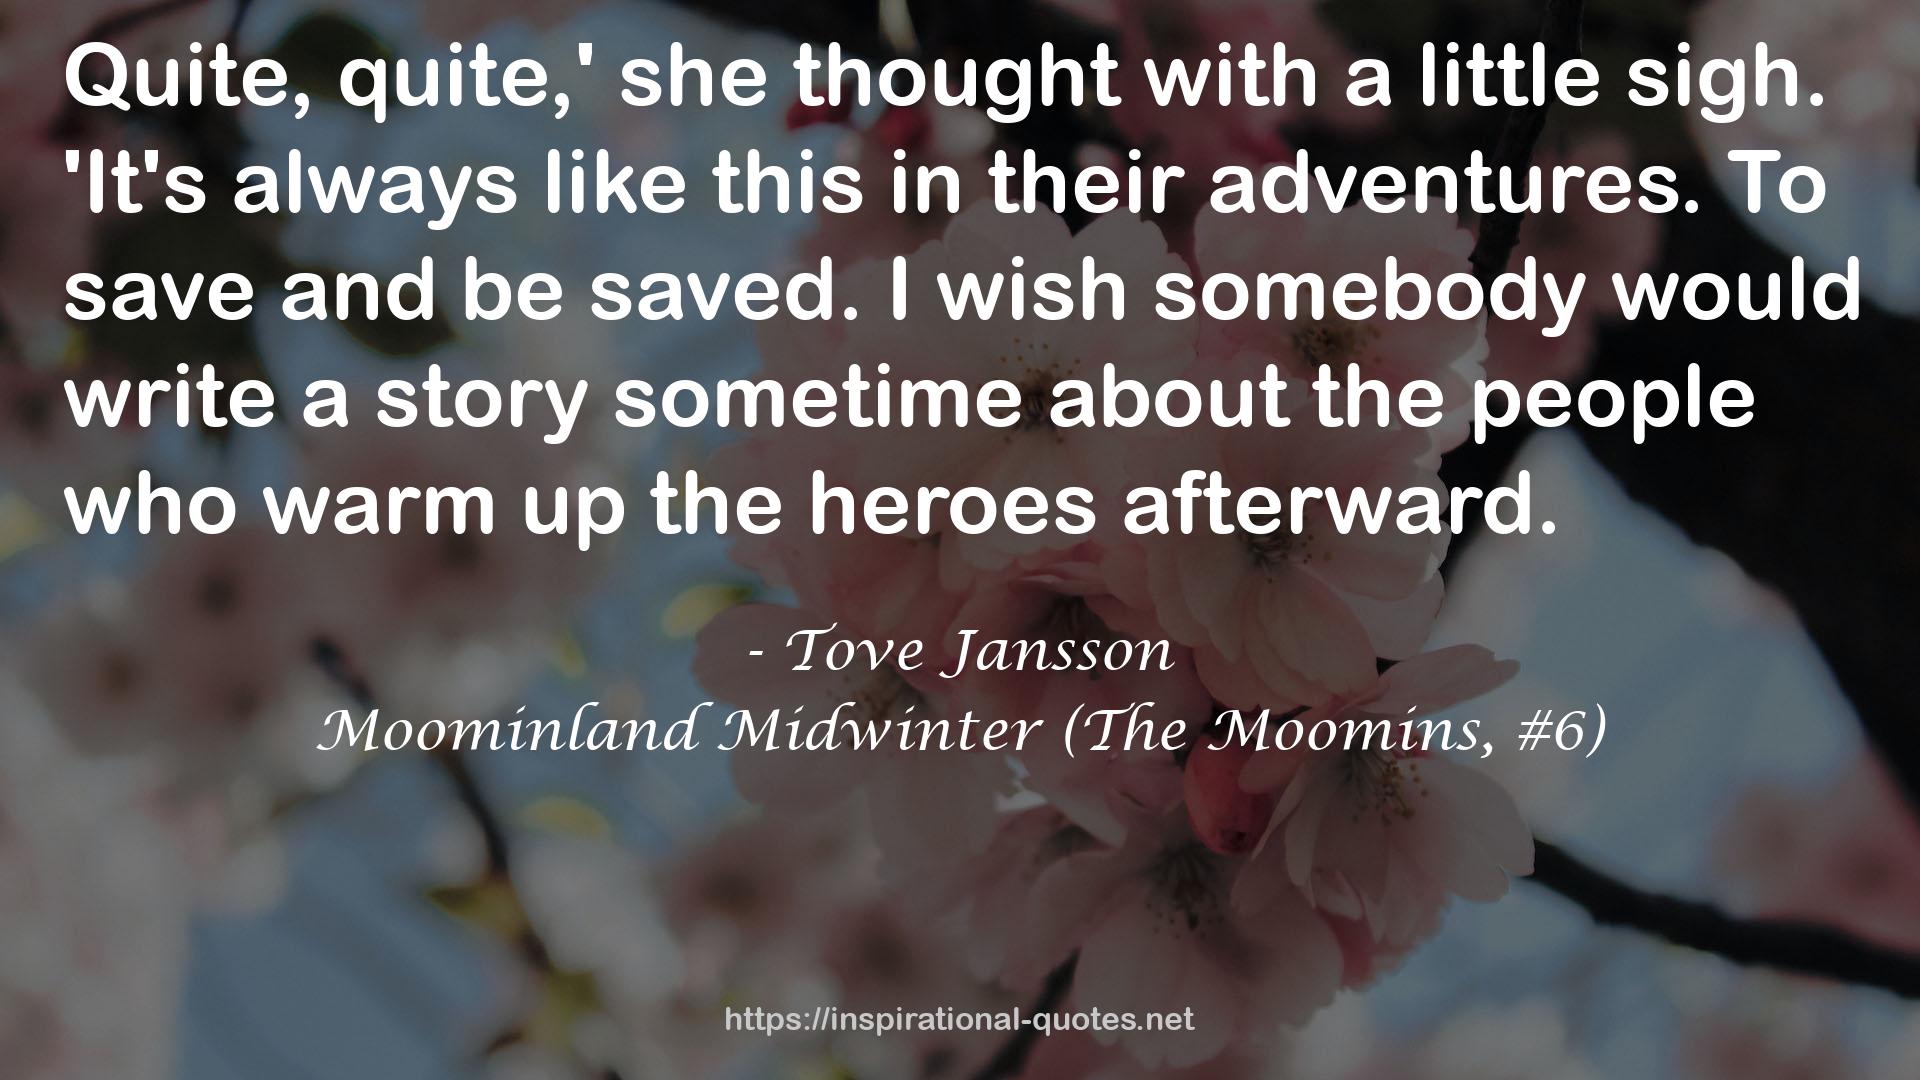 Moominland Midwinter (The Moomins, #6) QUOTES